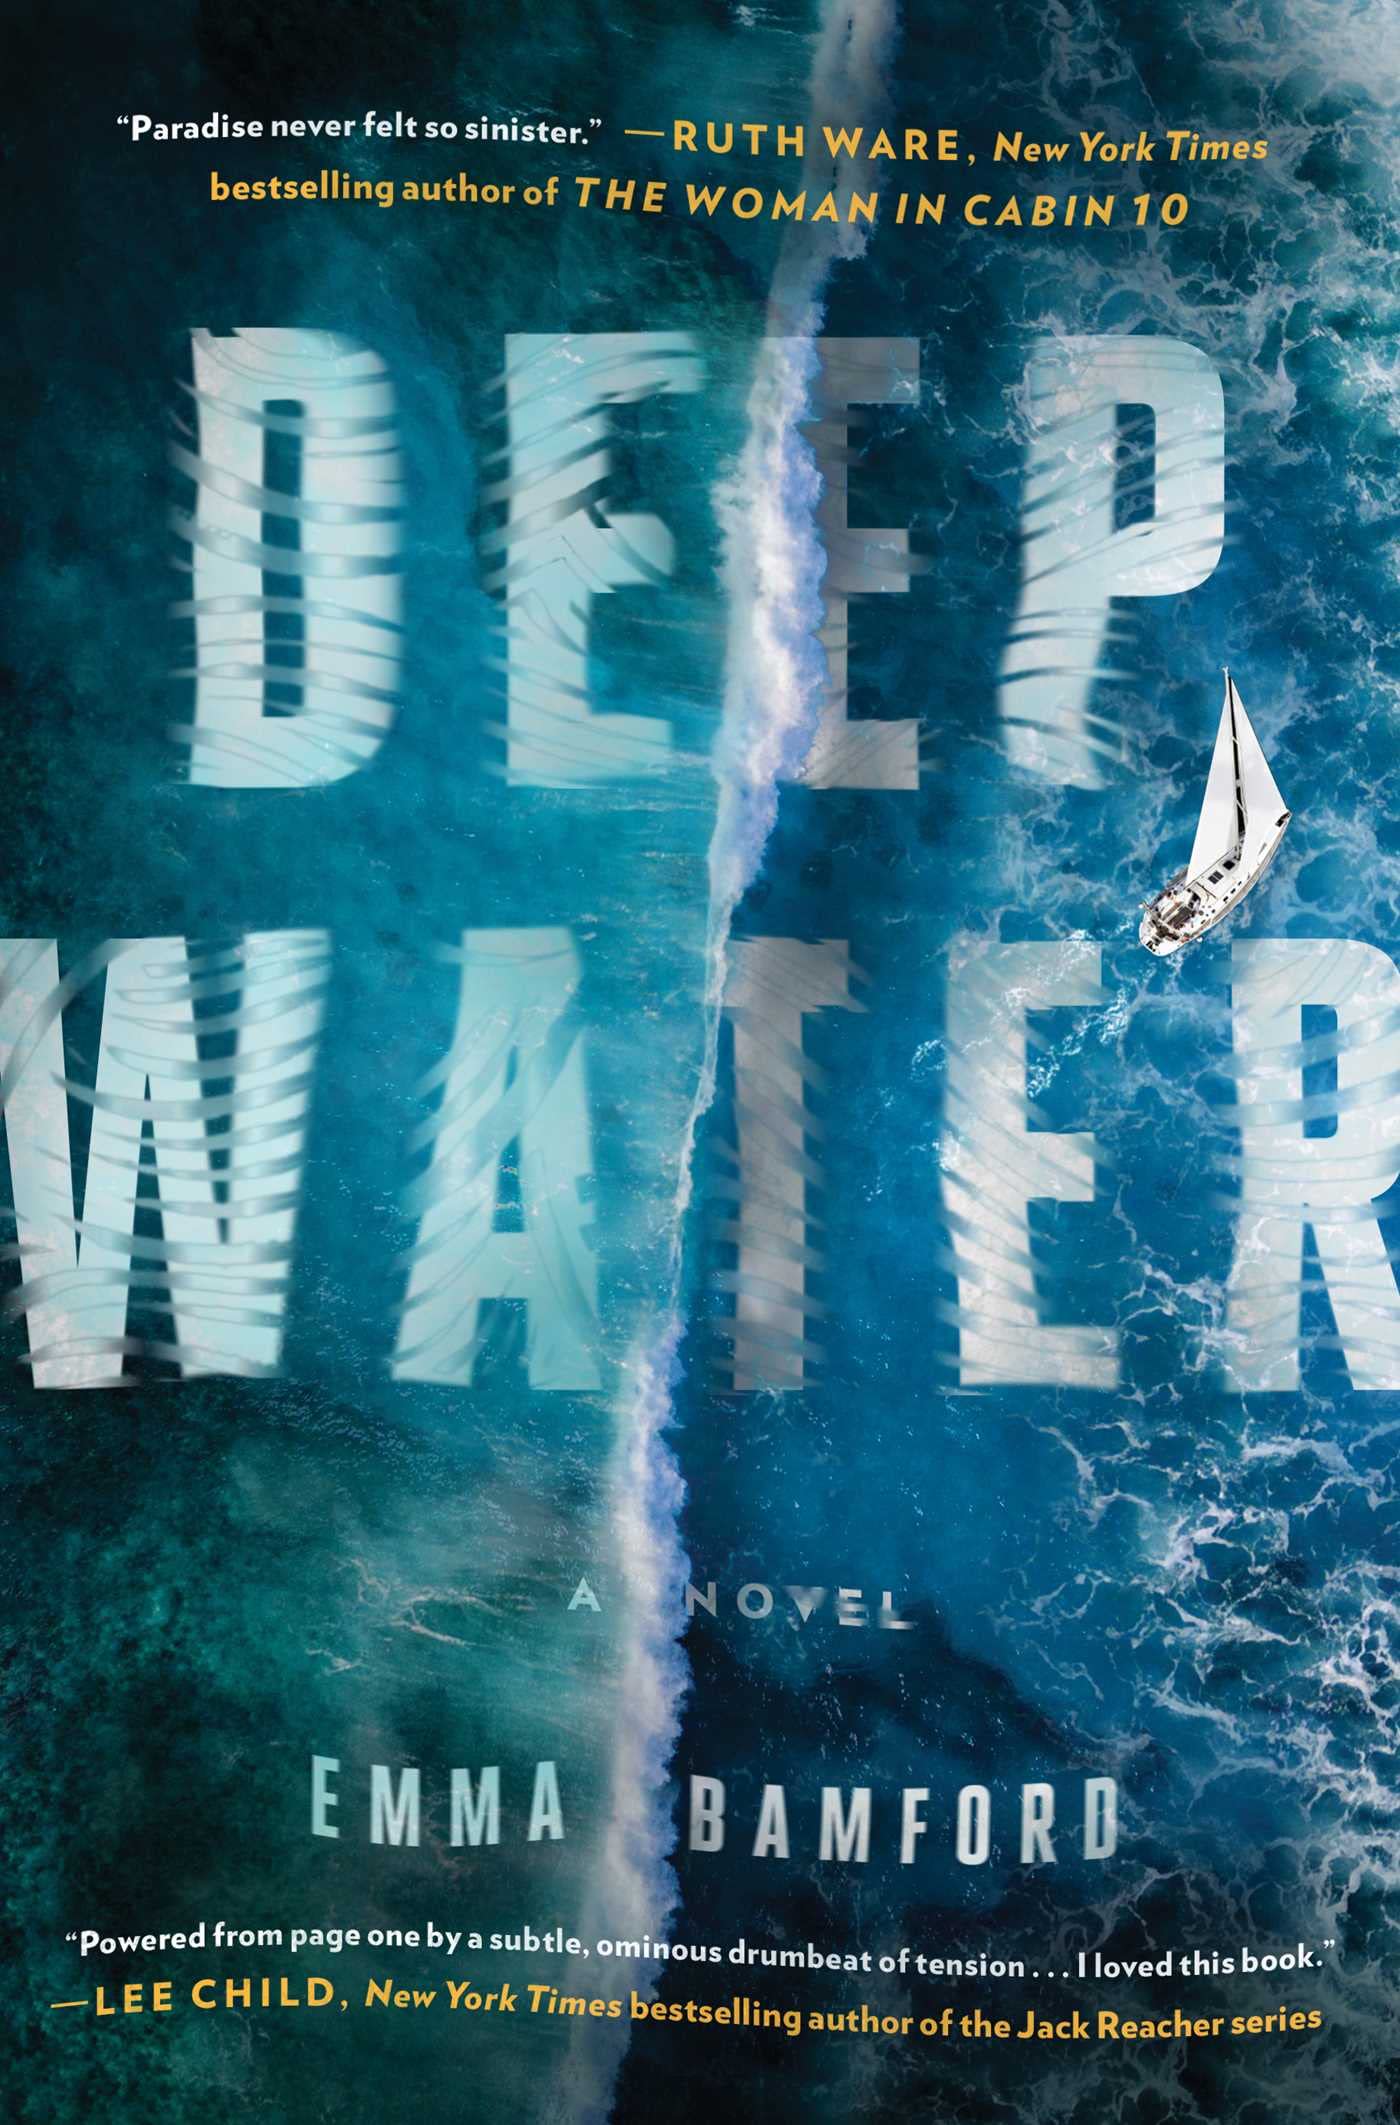 Image for "Deep Water"